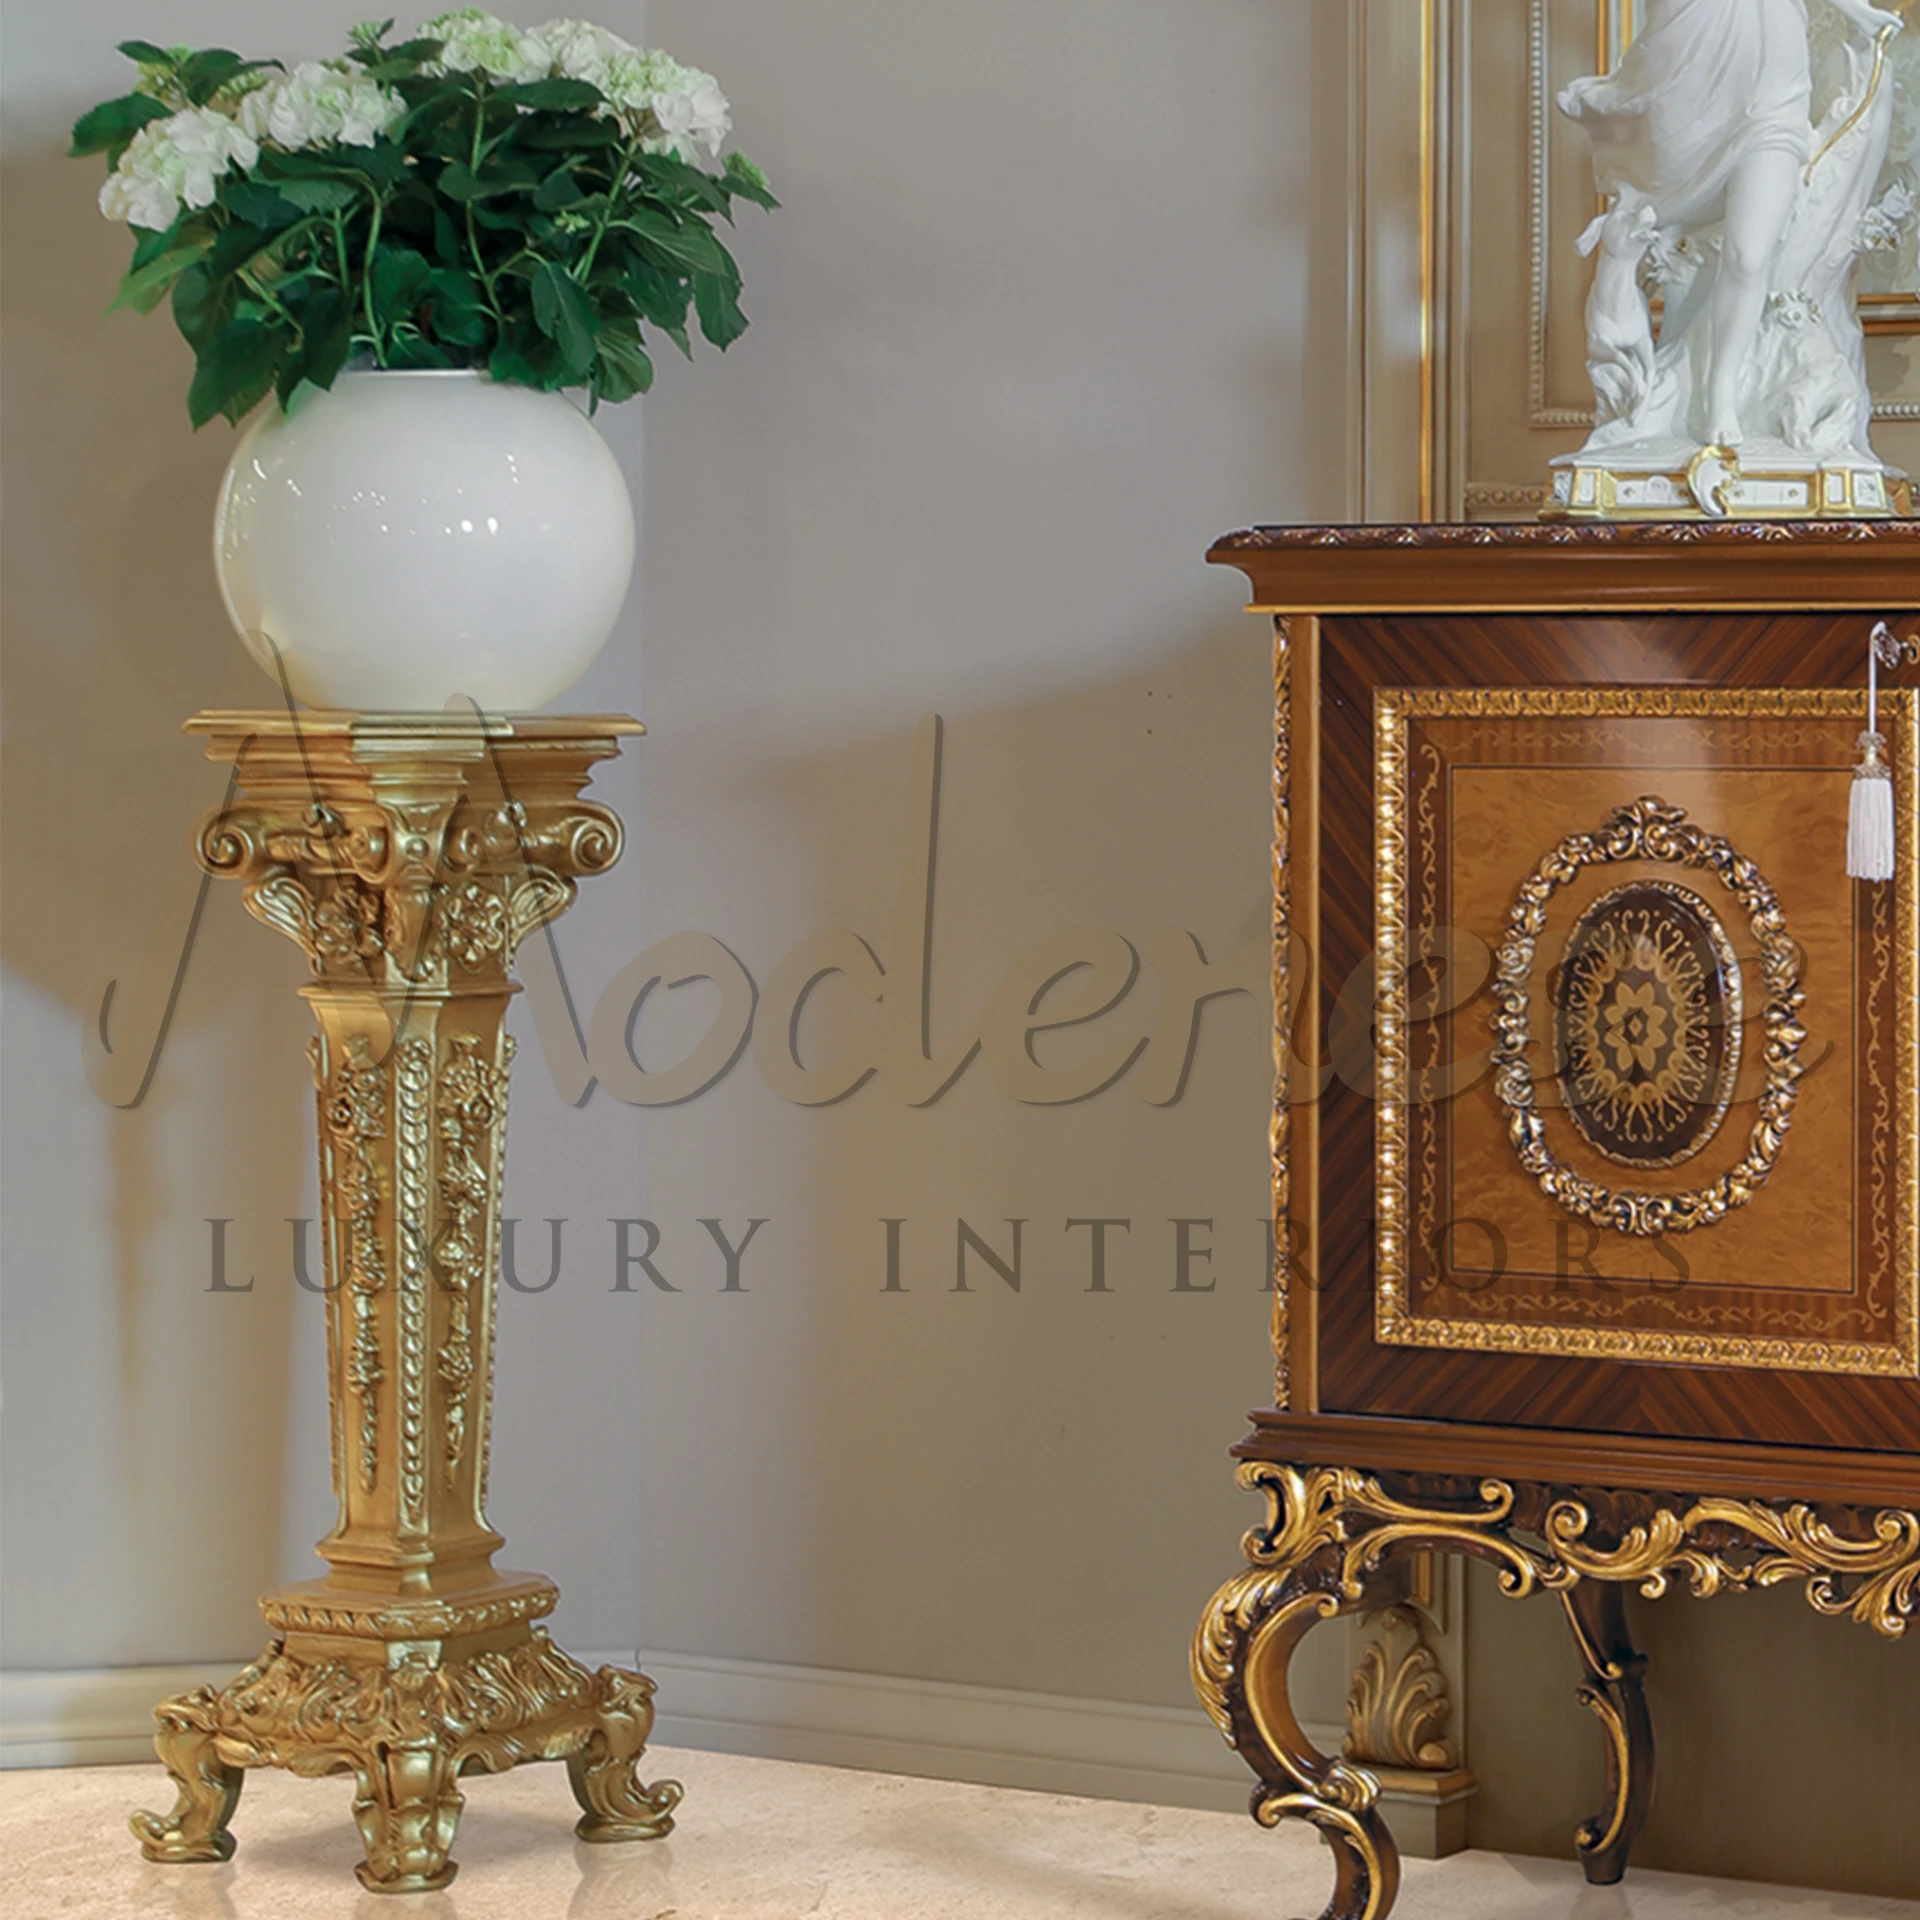 Exquisite vase stand, blending classic style and solid wood, ideal for sophisticated interior settings.